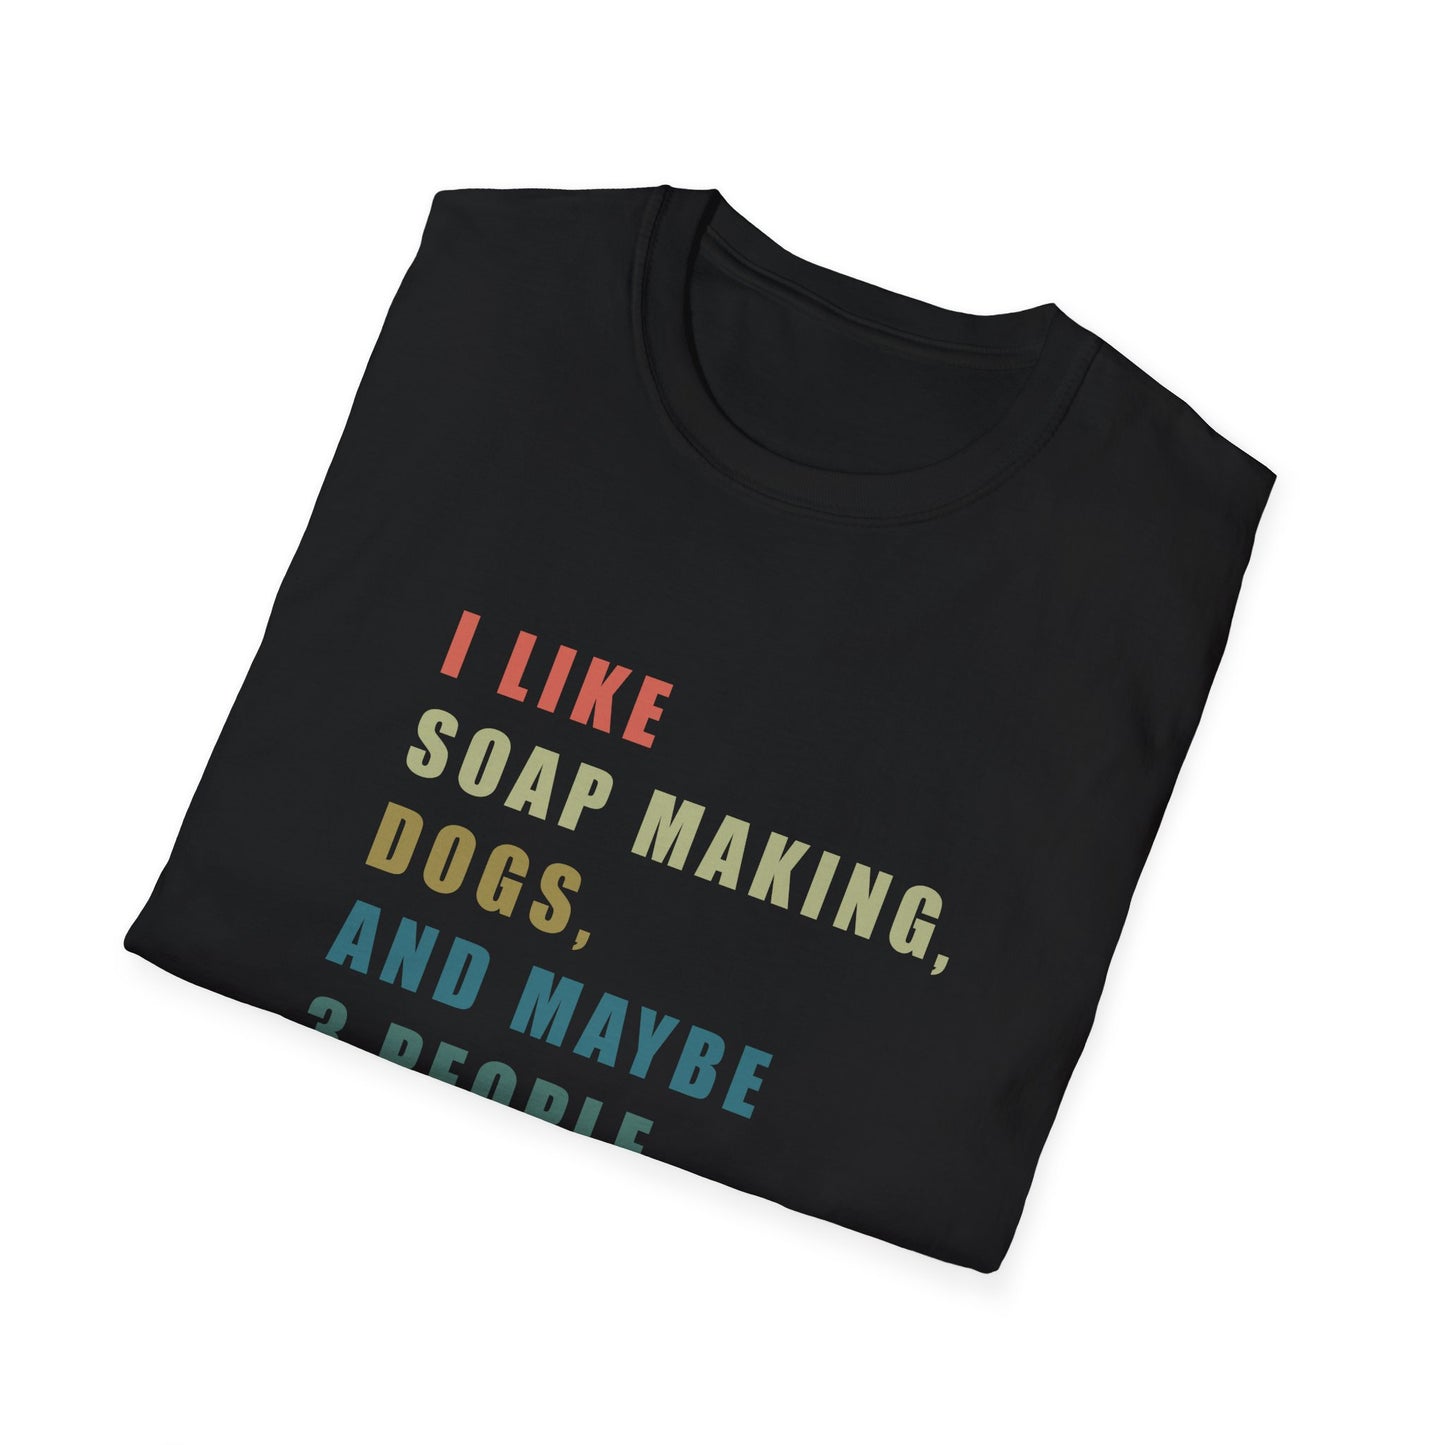 I Like Soap Making, Dogs, and Maybe 3 People T-Shirt